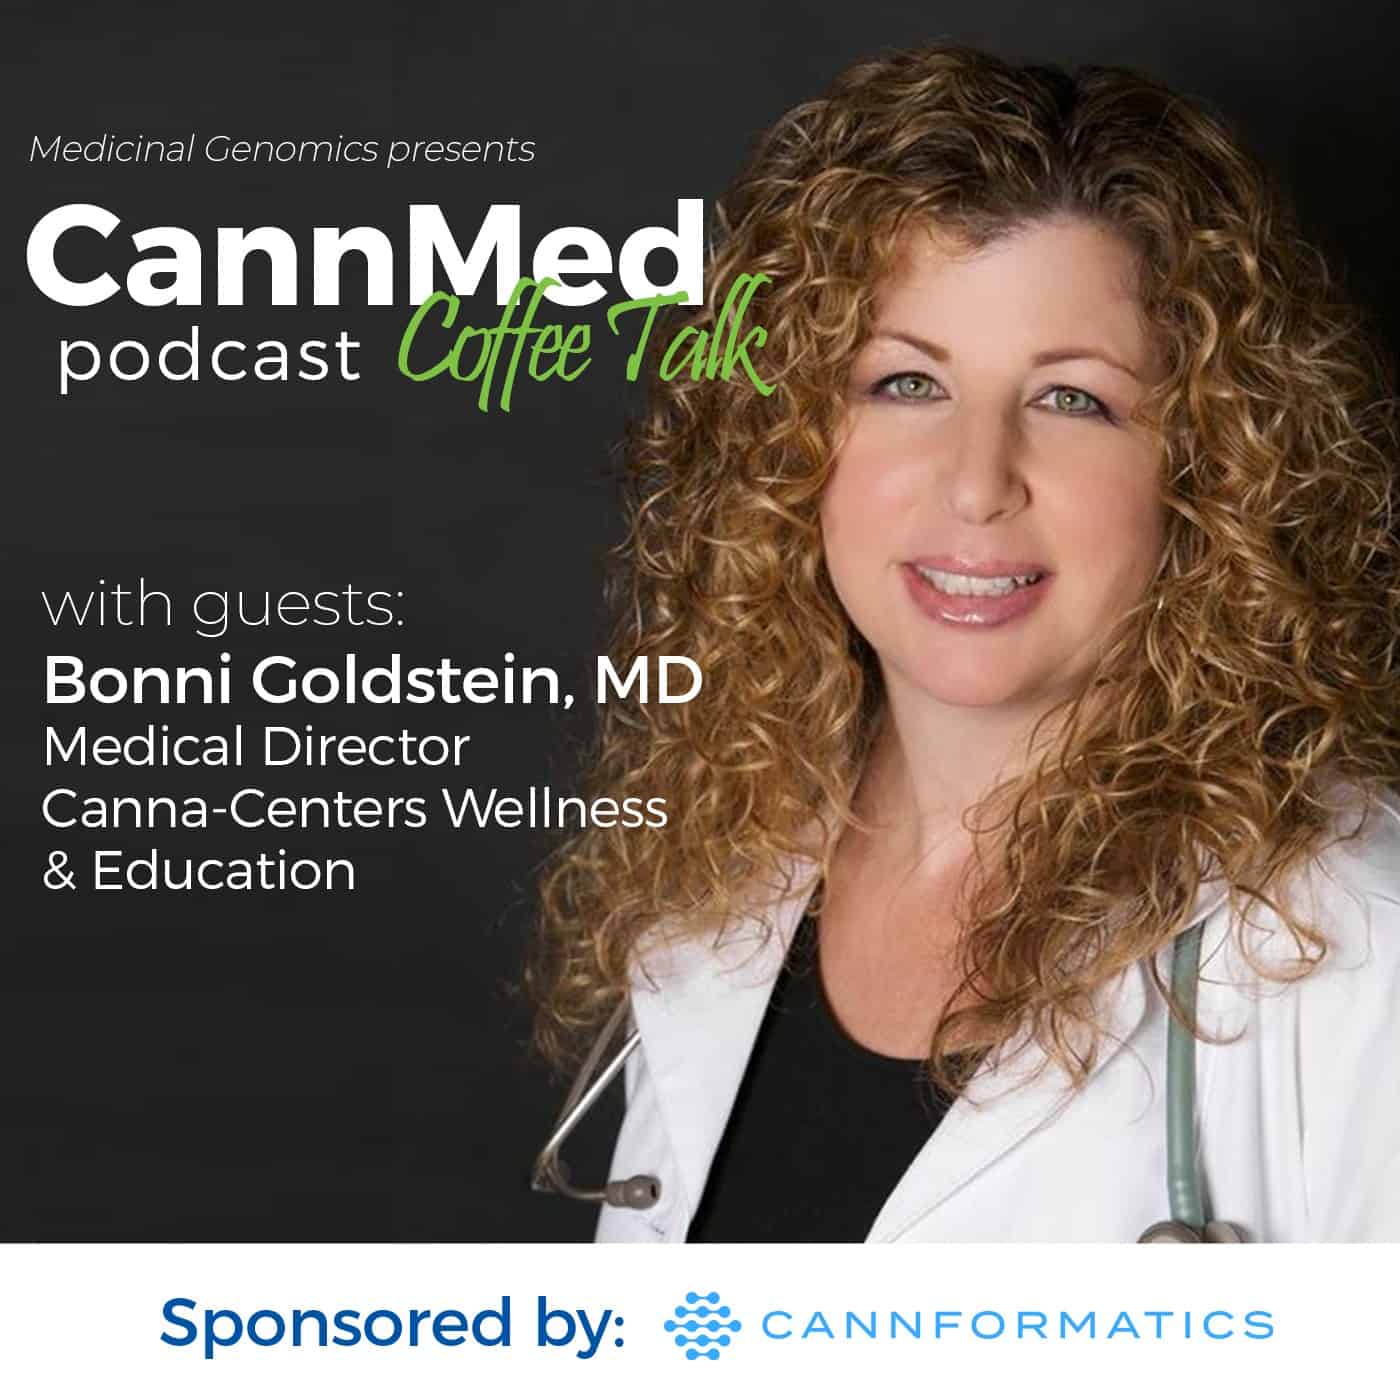 Featured image for “Cannabis as an Alternative to Common Pharmaceuticals with Bonni Goldstein, MD”